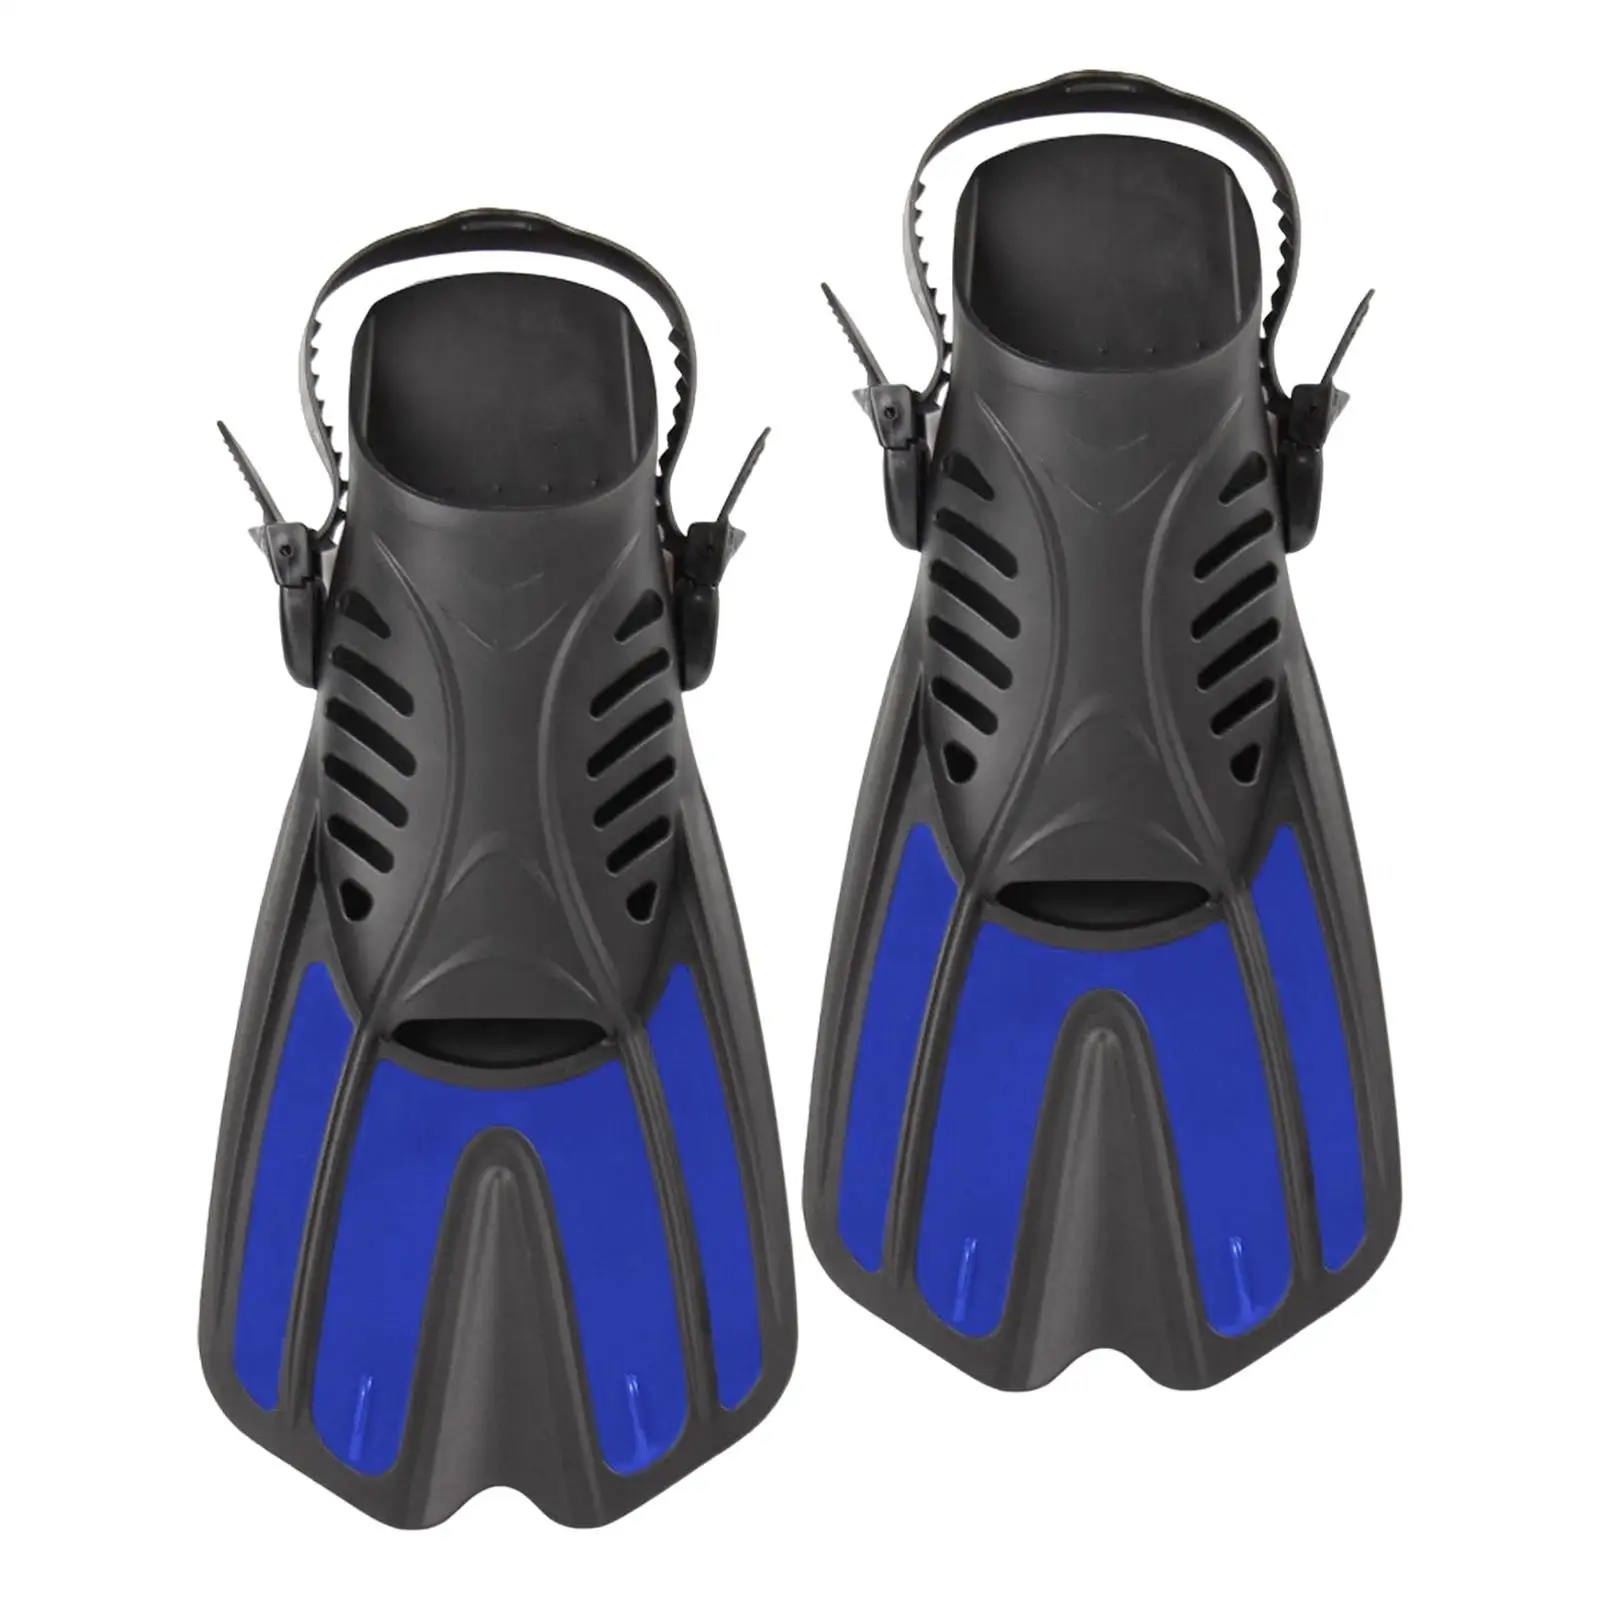 2x Adjustable Buckles Diving Flippers Open Heel Swimming Gear Feet Shoe for Freediving Training Water Sports Adults Beginners